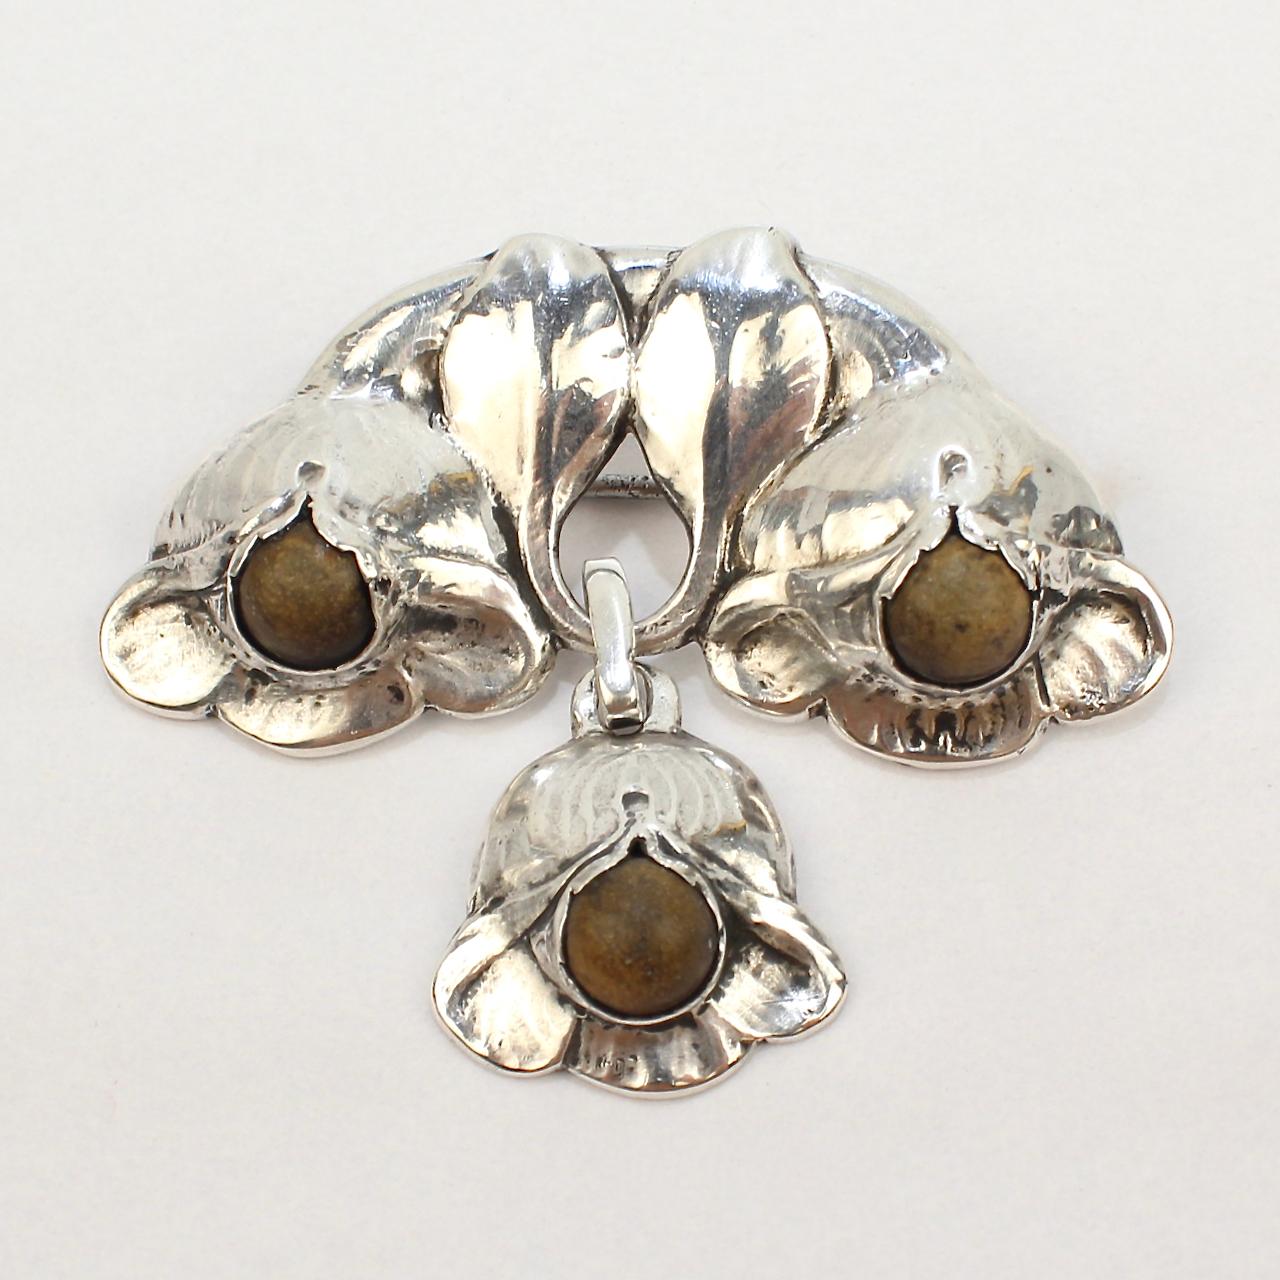 A very fine Evald Nielsen Skonevirke chandelier style brooch. 

The semi-circular top has two inverted flowers supporting an inverted floral pendant.

Each of the three flowers is set with a Jade (Nephrite) cabochon at its center. 

A wonderful